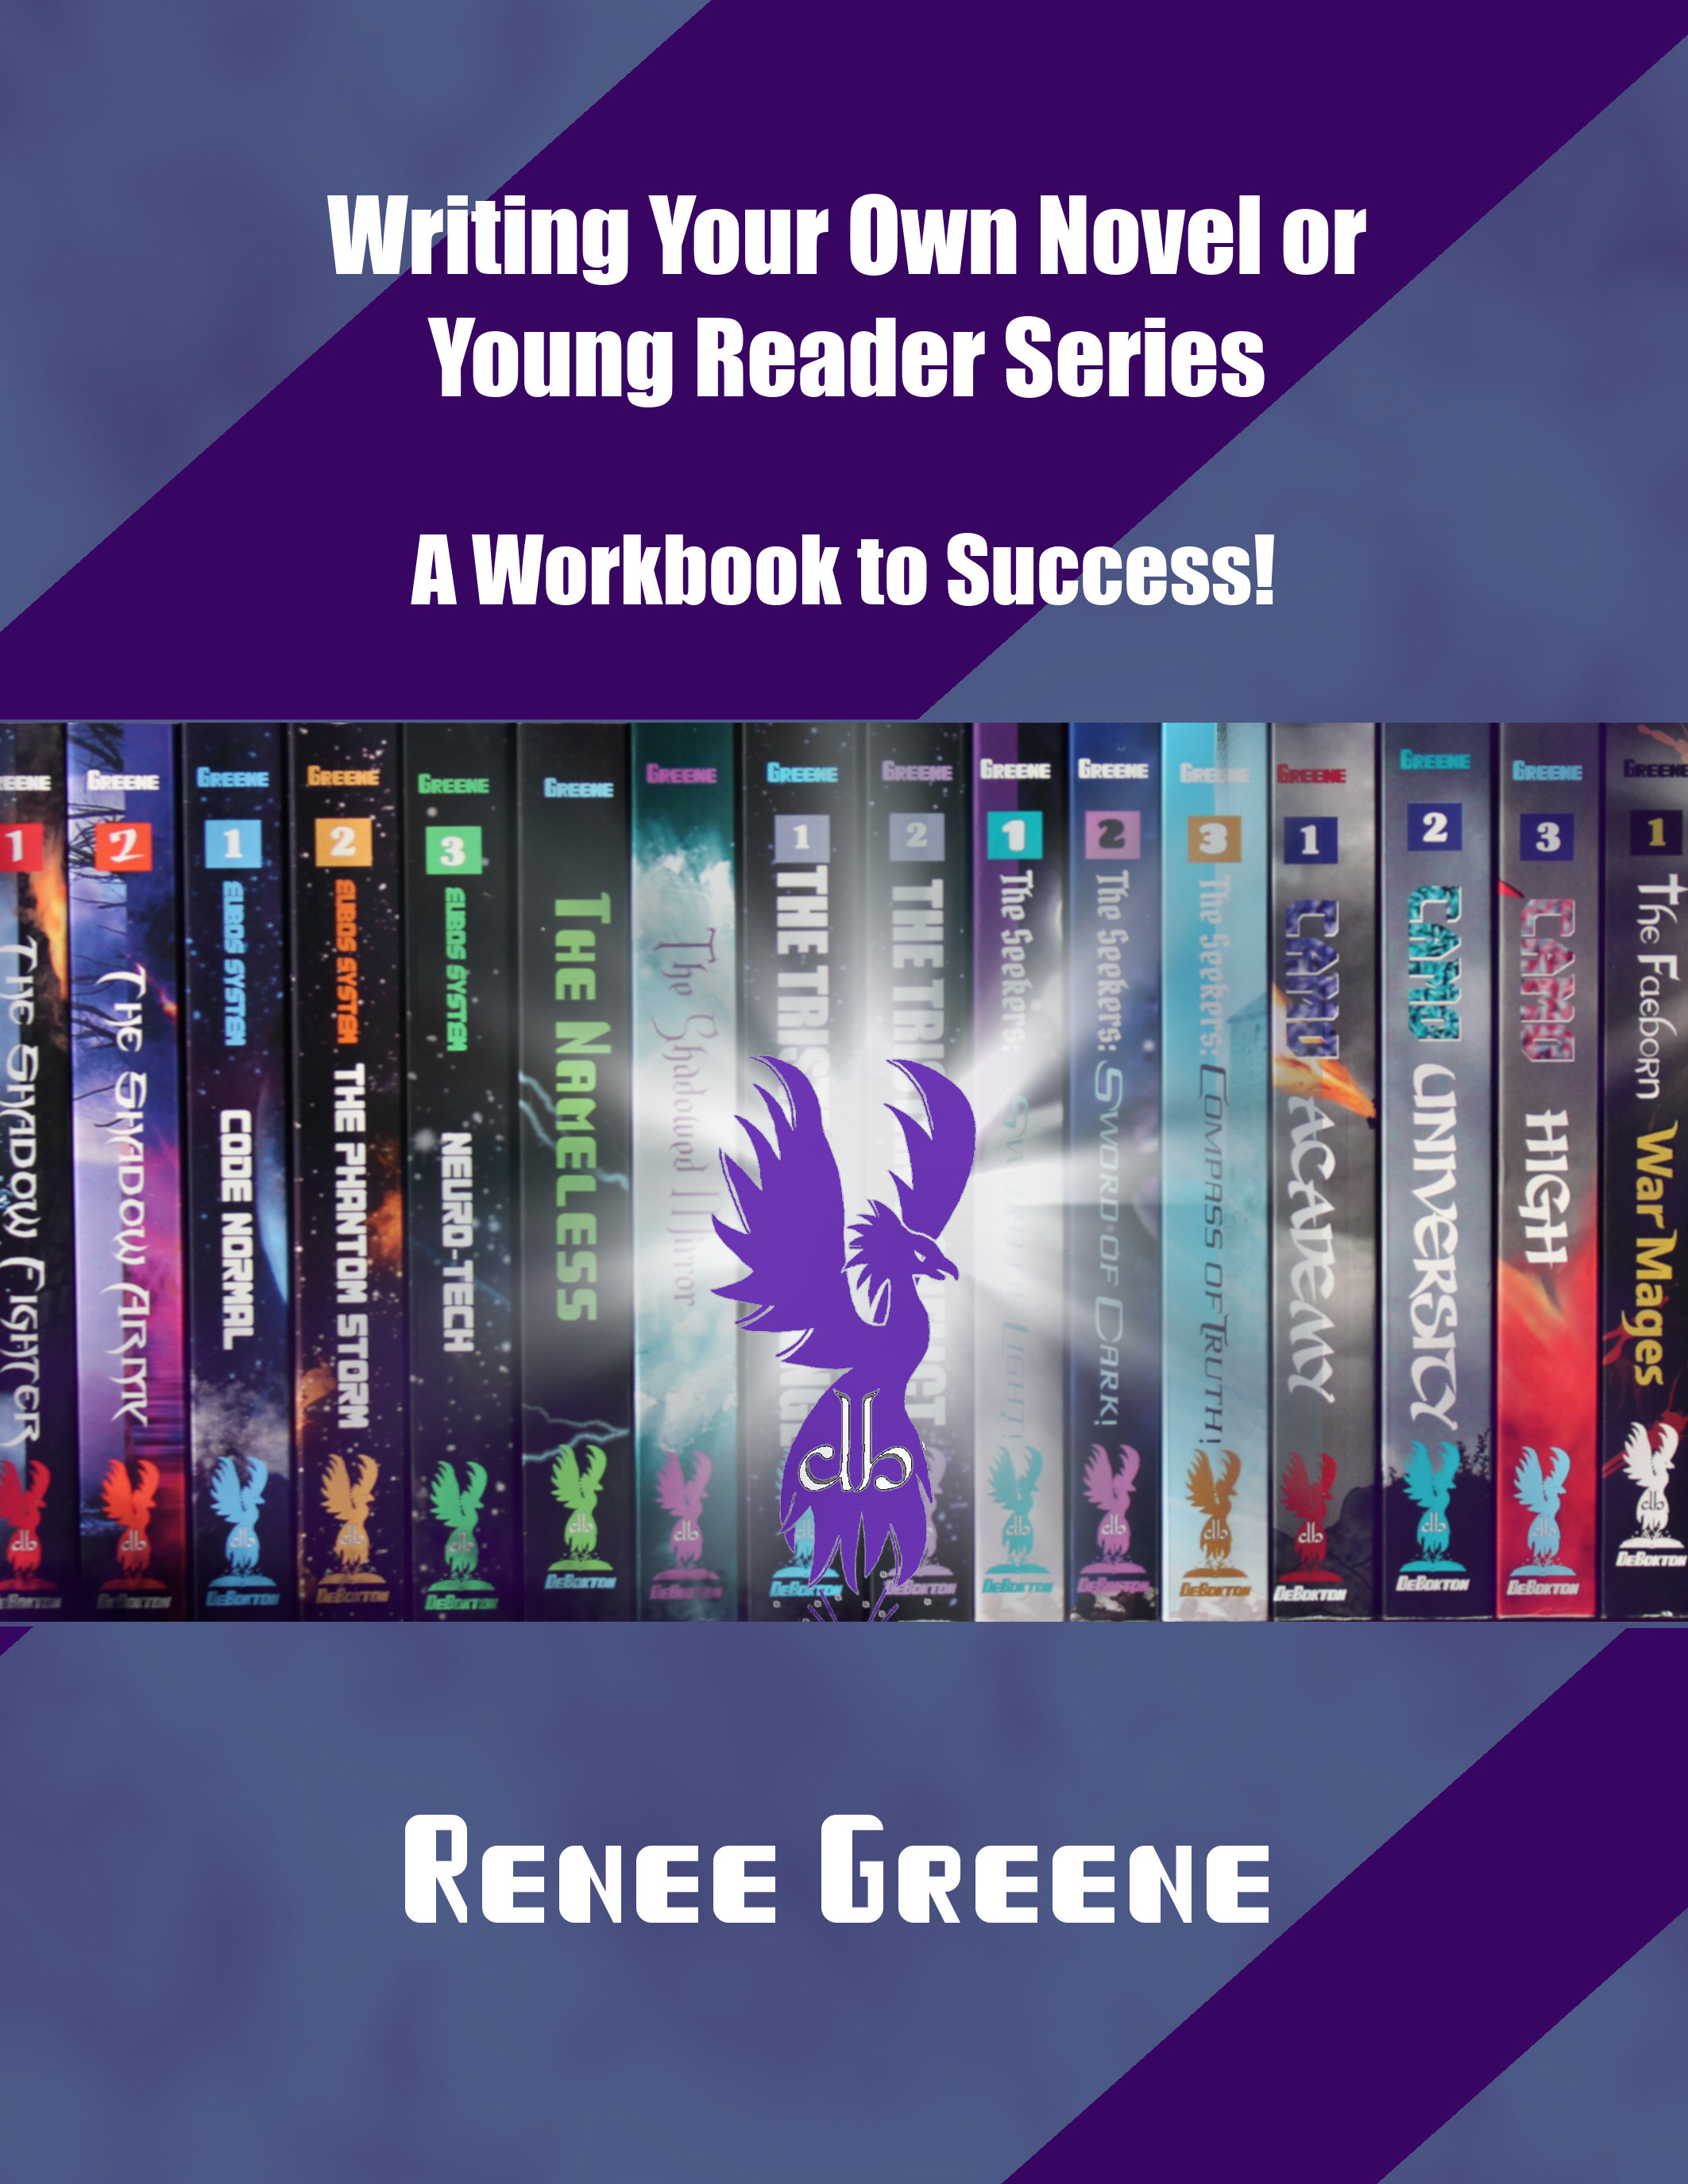 Writing Your Own Novel or Young Reader Series